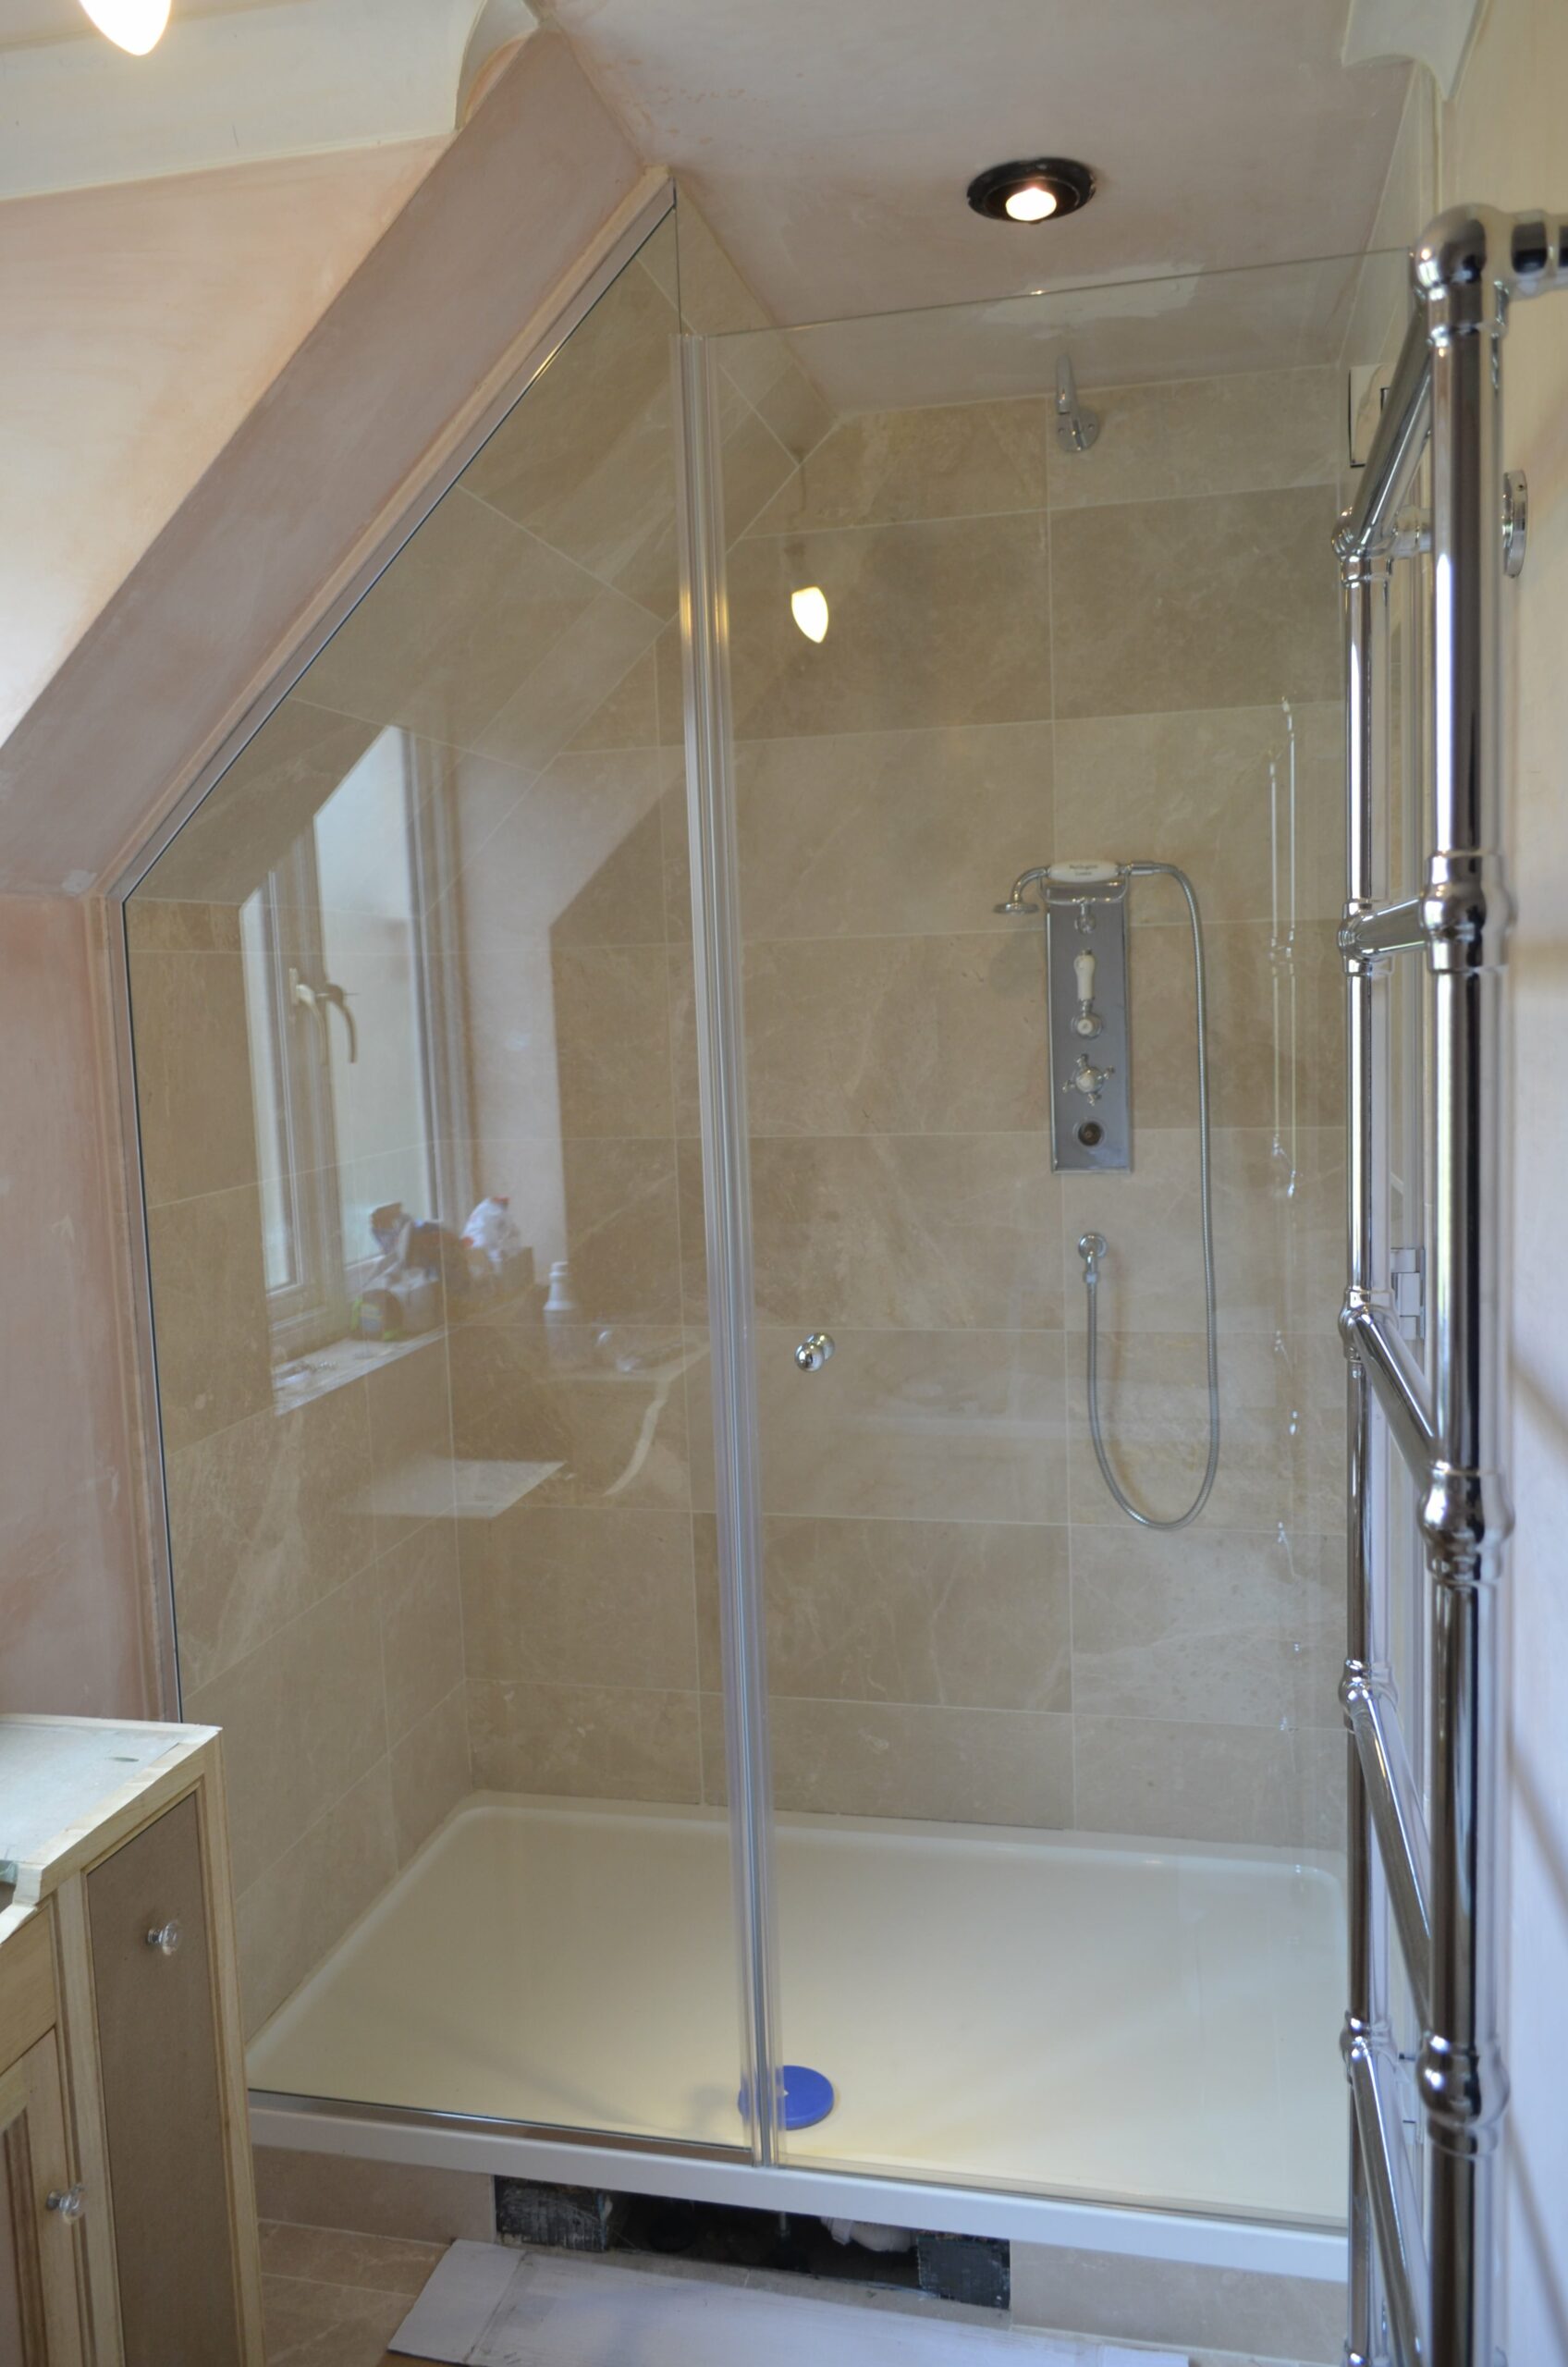 asymmetrical shaped shower space with glass screen and door